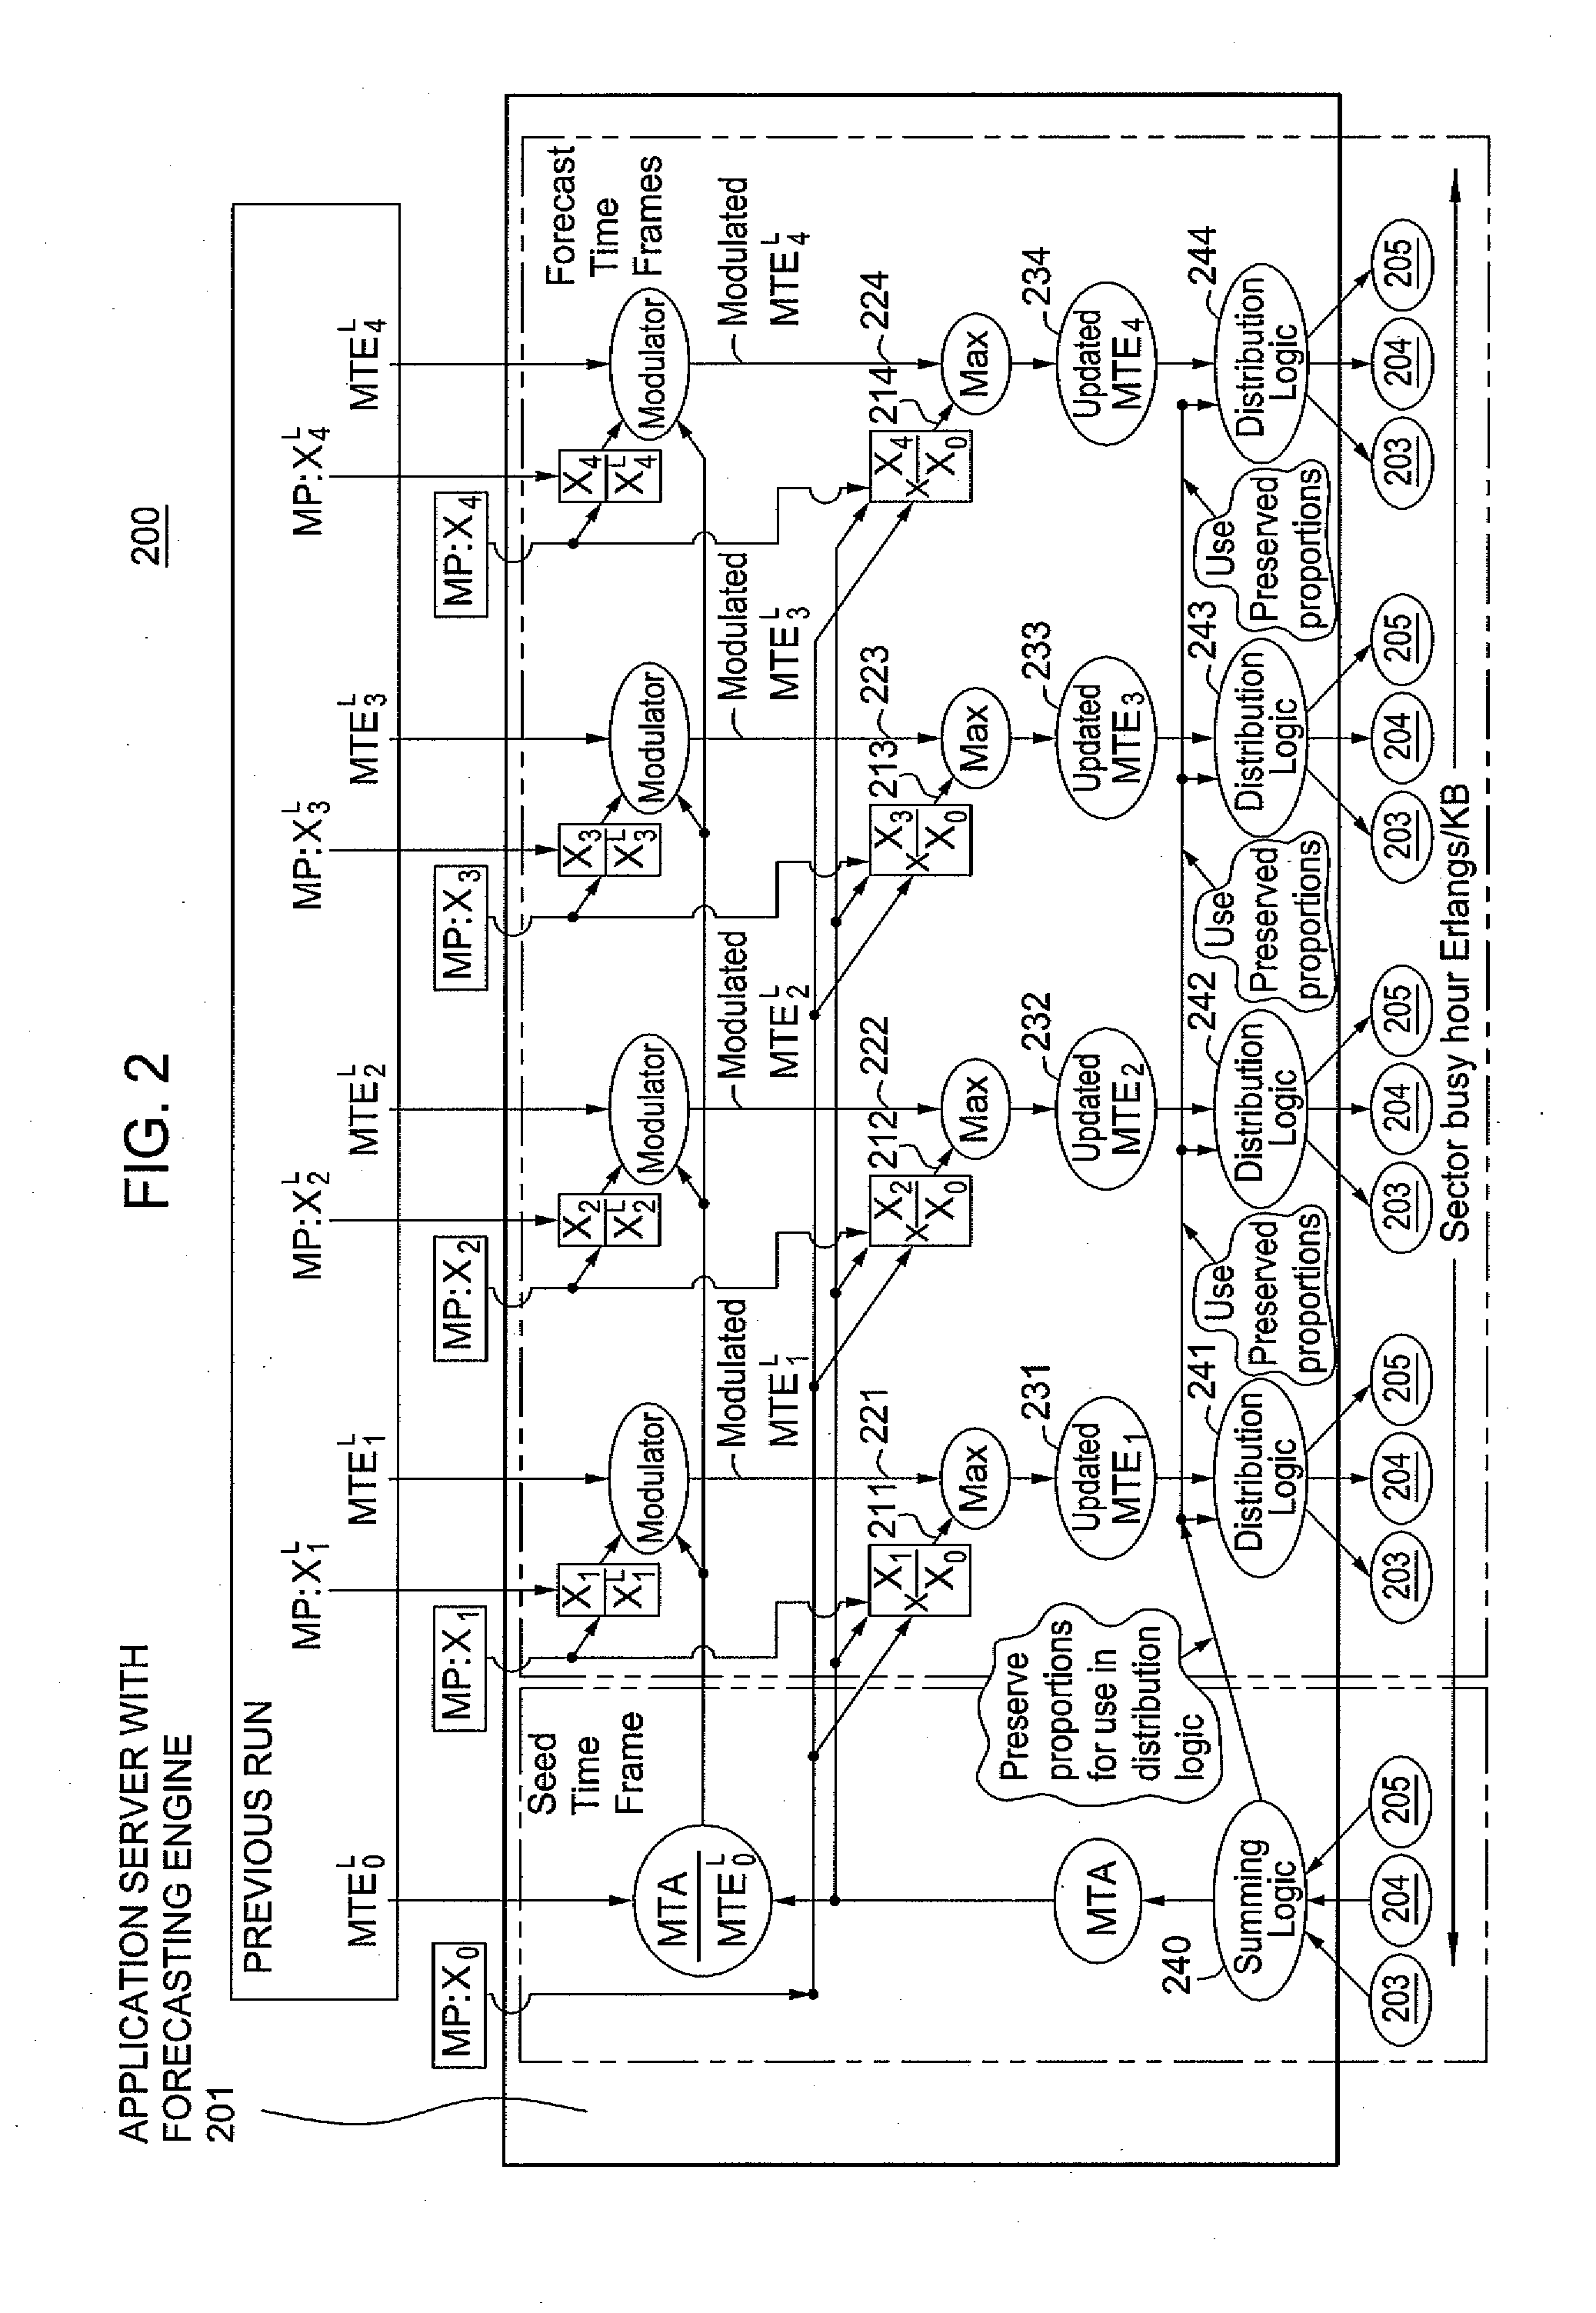 Method and apparatus for forecasting busy hour traffic for a wireless network